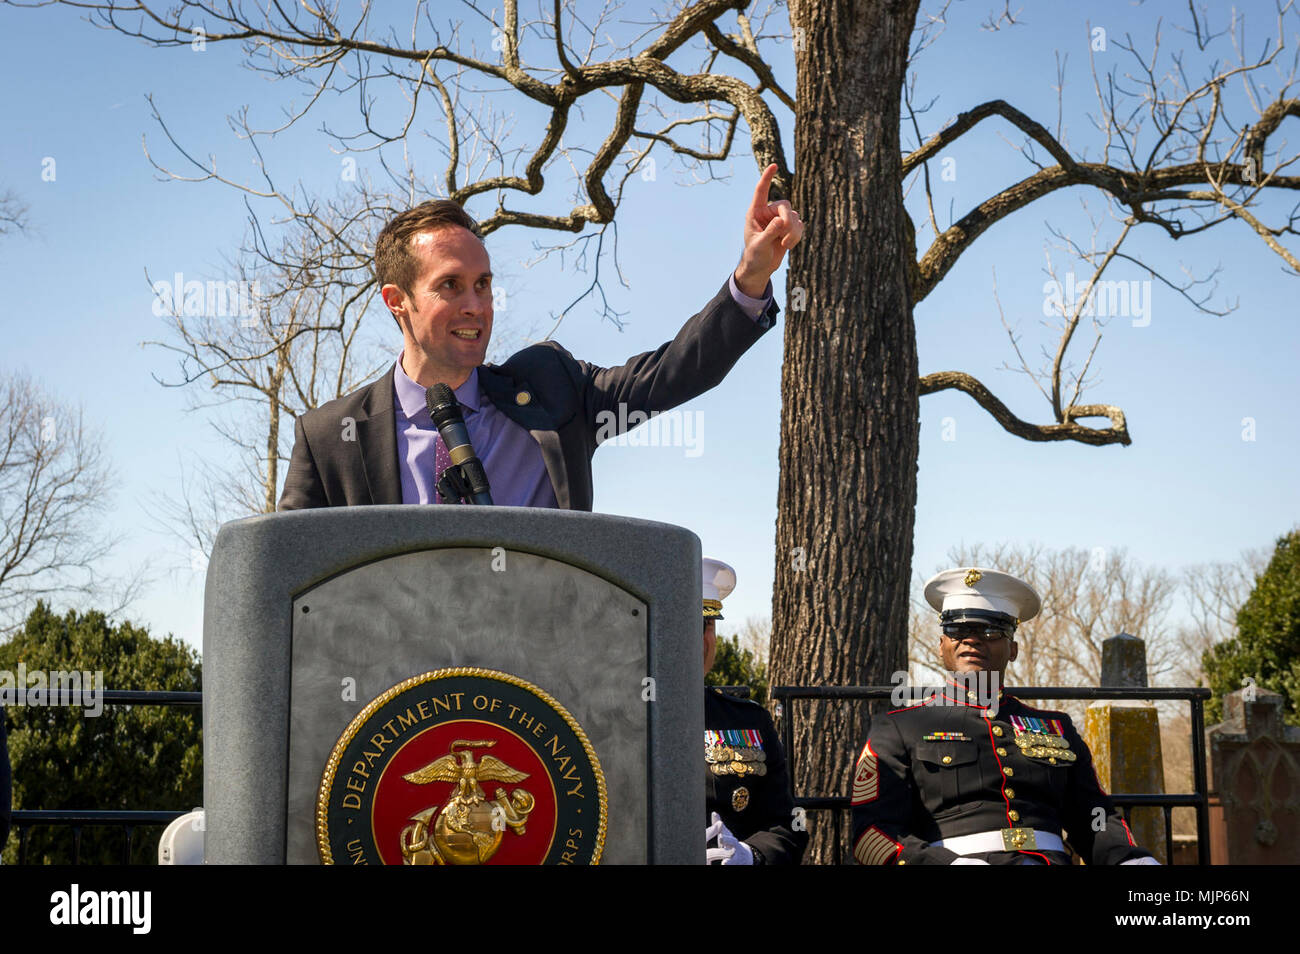 The Honorable Schuyler VanValkenburg, Virginia House of Delegates, 72nd District, provides remarks during the Presidential wreath laying ceremony held to honor the 4th President of the United States, James Madison, also known as the Father of the Constitution, at his home at Montpelier, Orange, Va., March 16, 2018. This event was held in commemoration of the 267th anniversary of the birth of Madison, born in 1751, and has also been decreed as James Madison Appreciation Day for the Commonwealth of Virginia. Armed Forces and civilians displaying courage bravery dedication commitment and sacrific Stock Photo